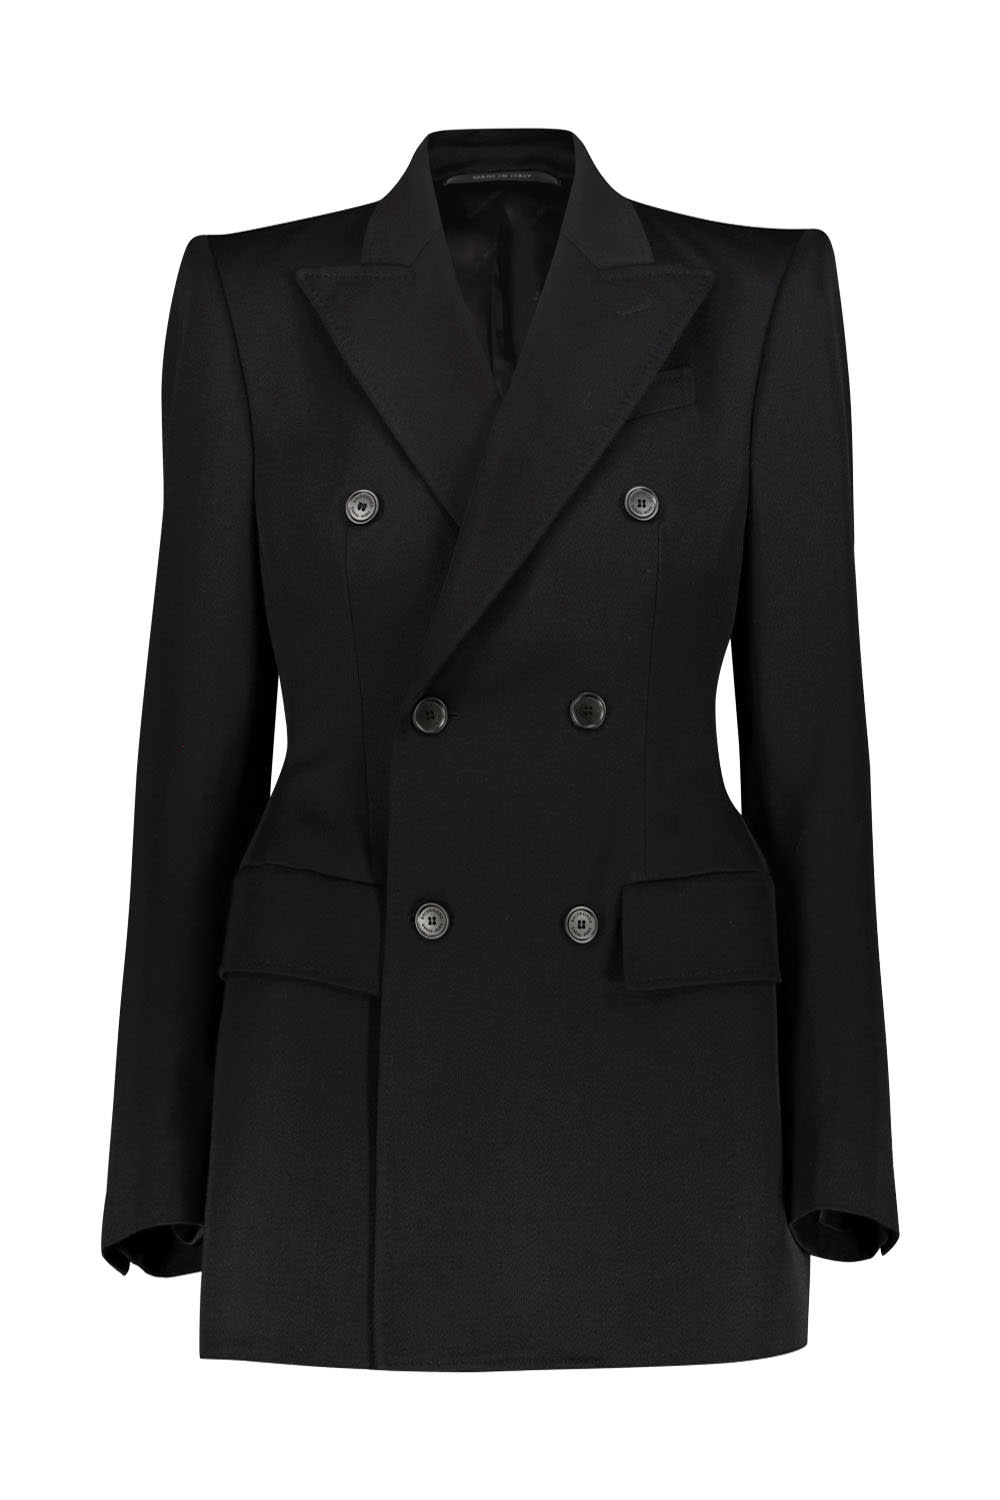 Garde-robe Hourglass Double Brested Jacket